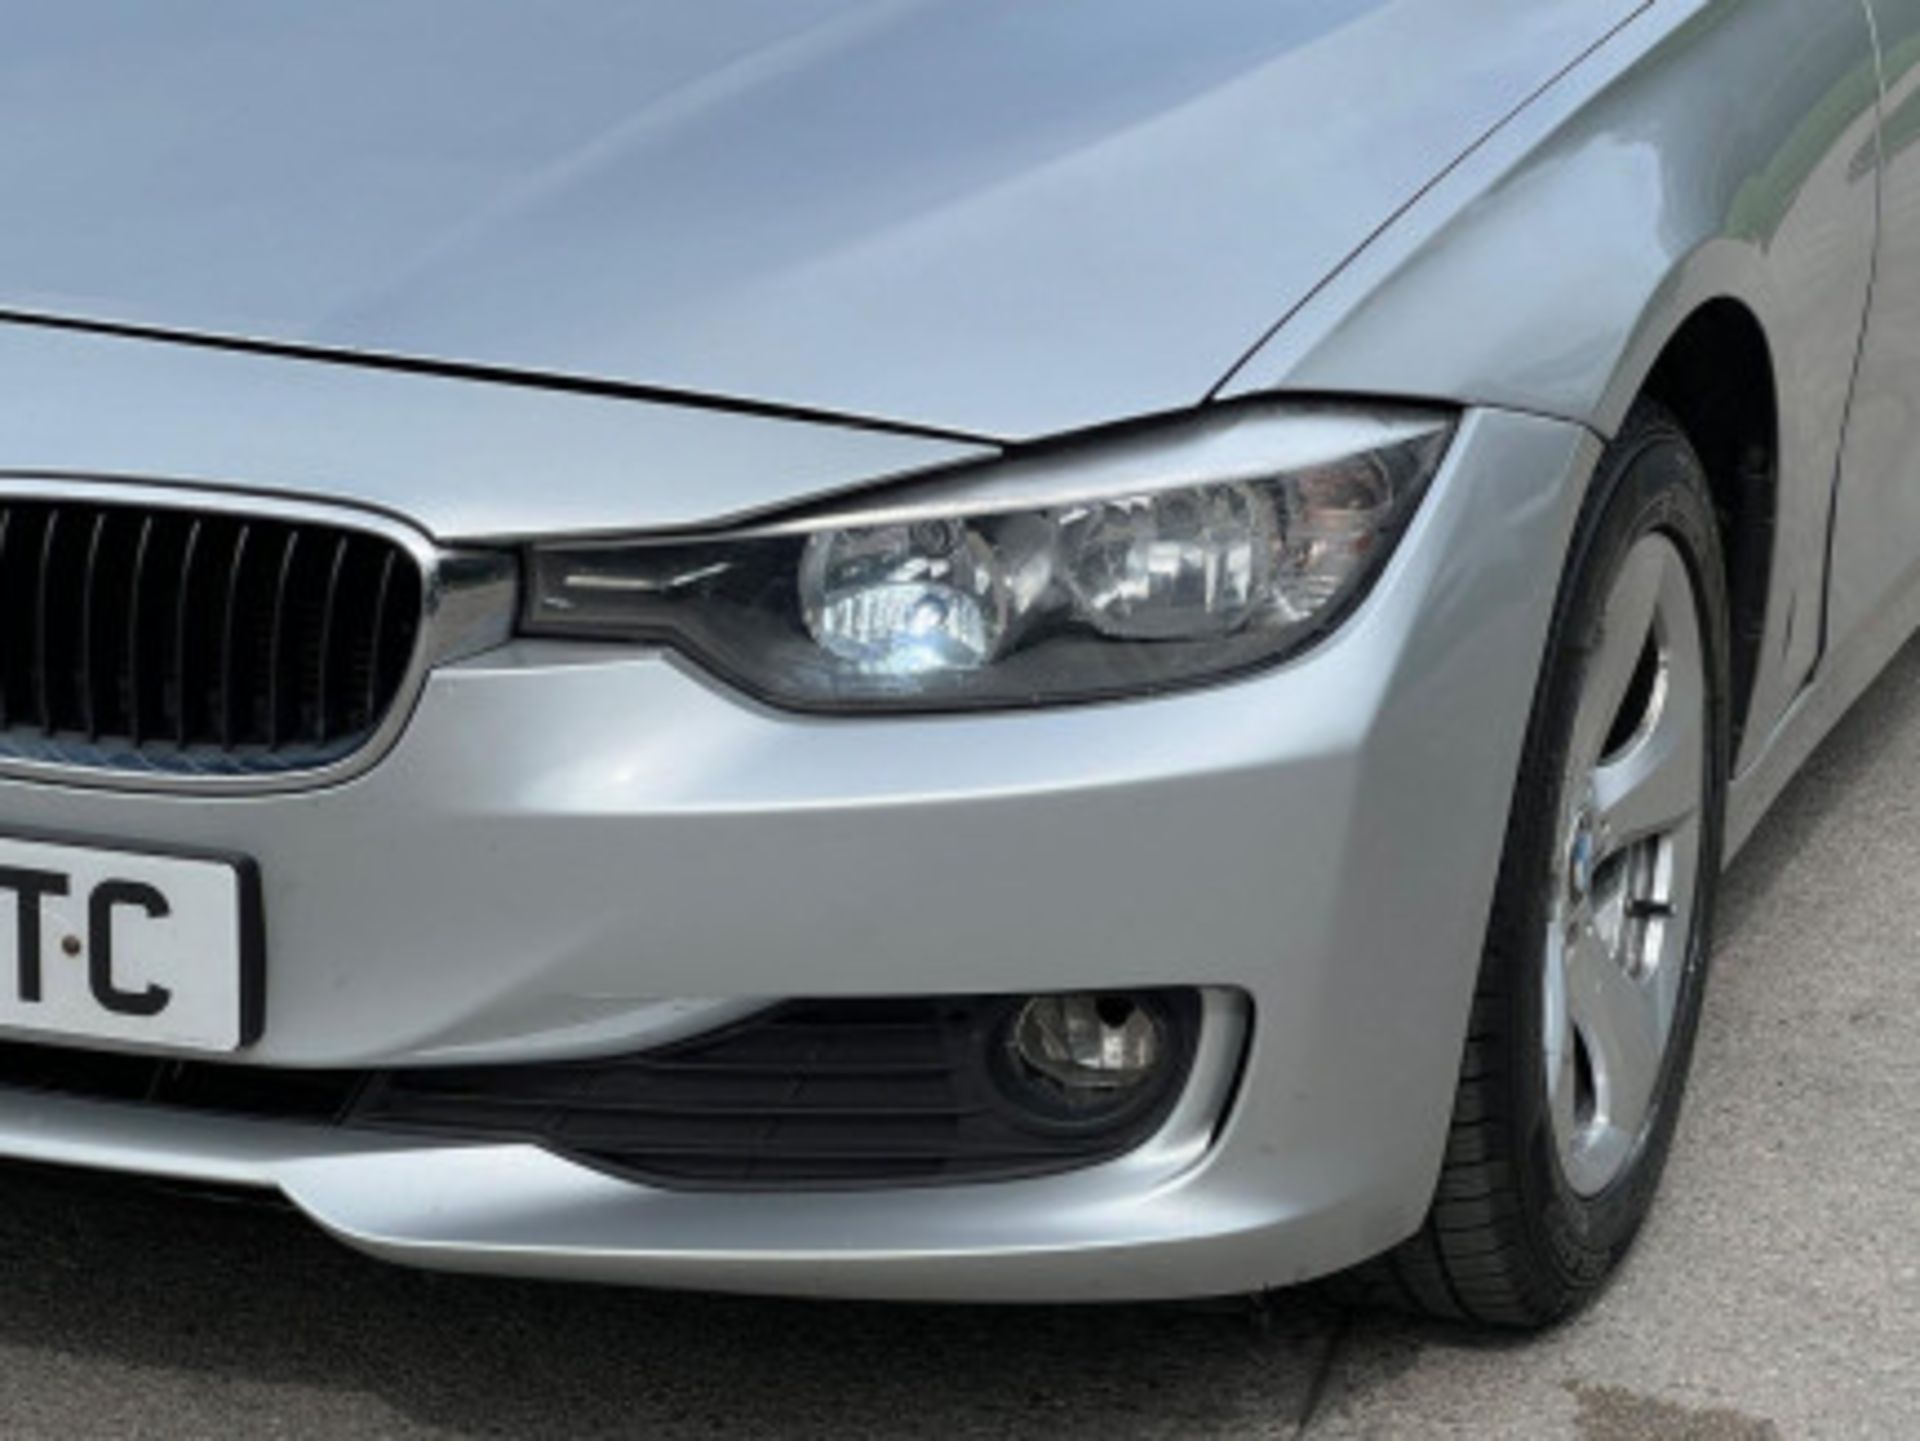 BMW 3 SERIES 2.0 DIESEL ED START STOP - A WELL-MAINTAINED GEM >>--NO VAT ON HAMMER--<< - Image 86 of 229